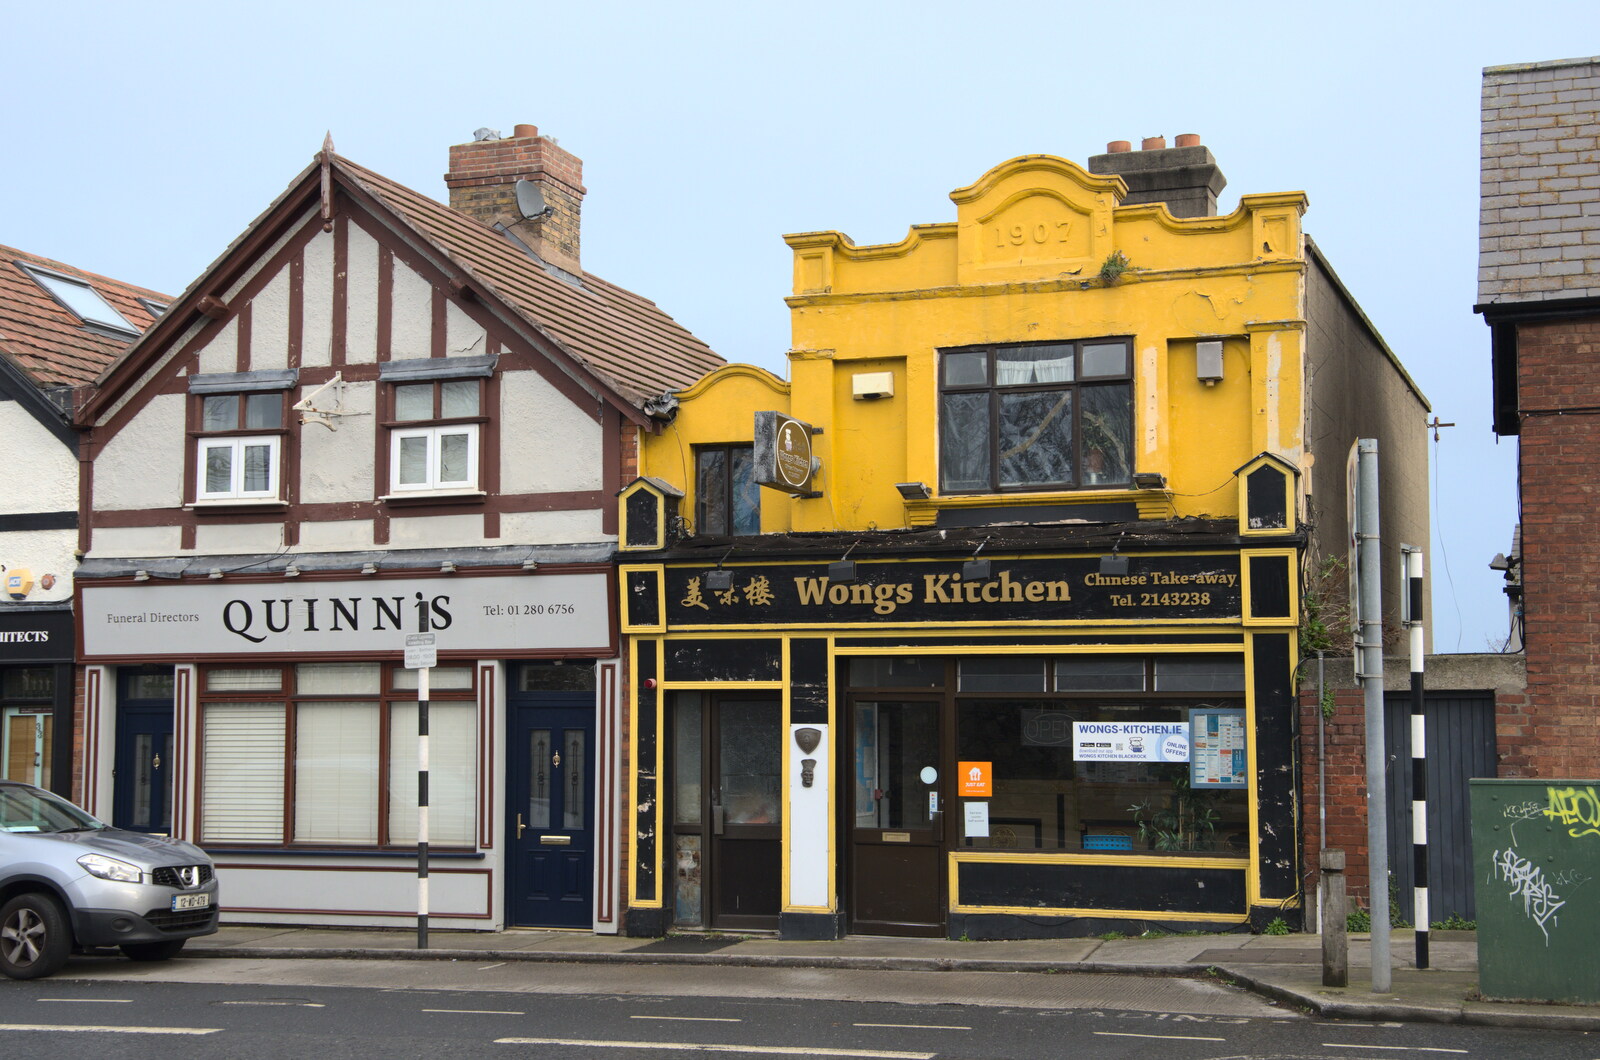 The End of the Breffni, Blackrock, Dublin - 18th February 2023: An Edwardian building from 1907, now a takeaway